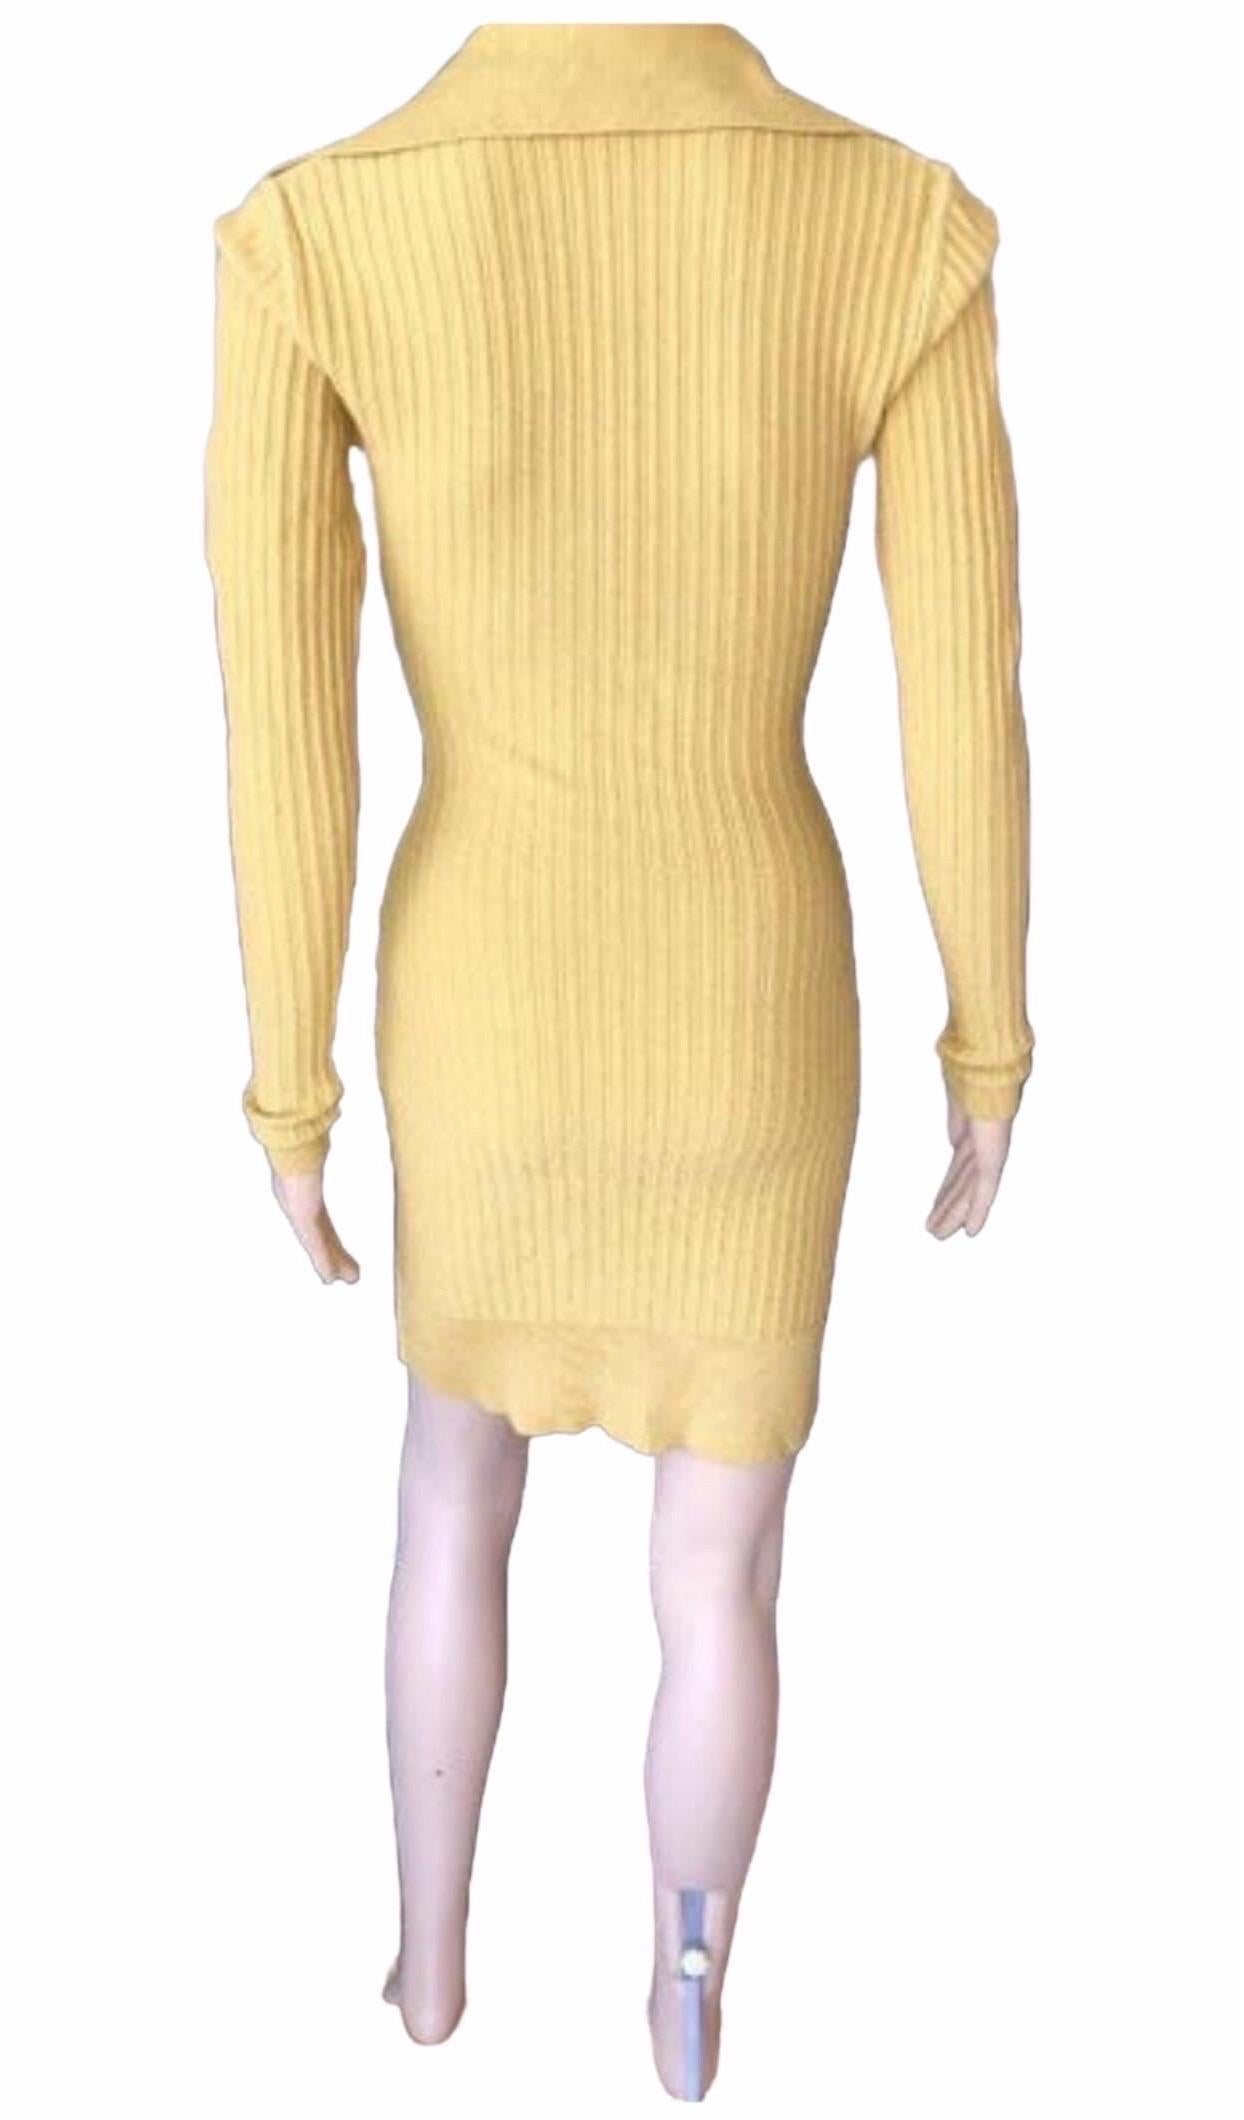 Azzedine Alaia Vintage Fitted Plunged Décolleté Mini Dress S

Alaïa long sleeve mustard yellow dress with rib knit collar and trim.

All Eyes on Alaïa

For the last half-century, the world’s most fashionable and adventuresome women have turned to